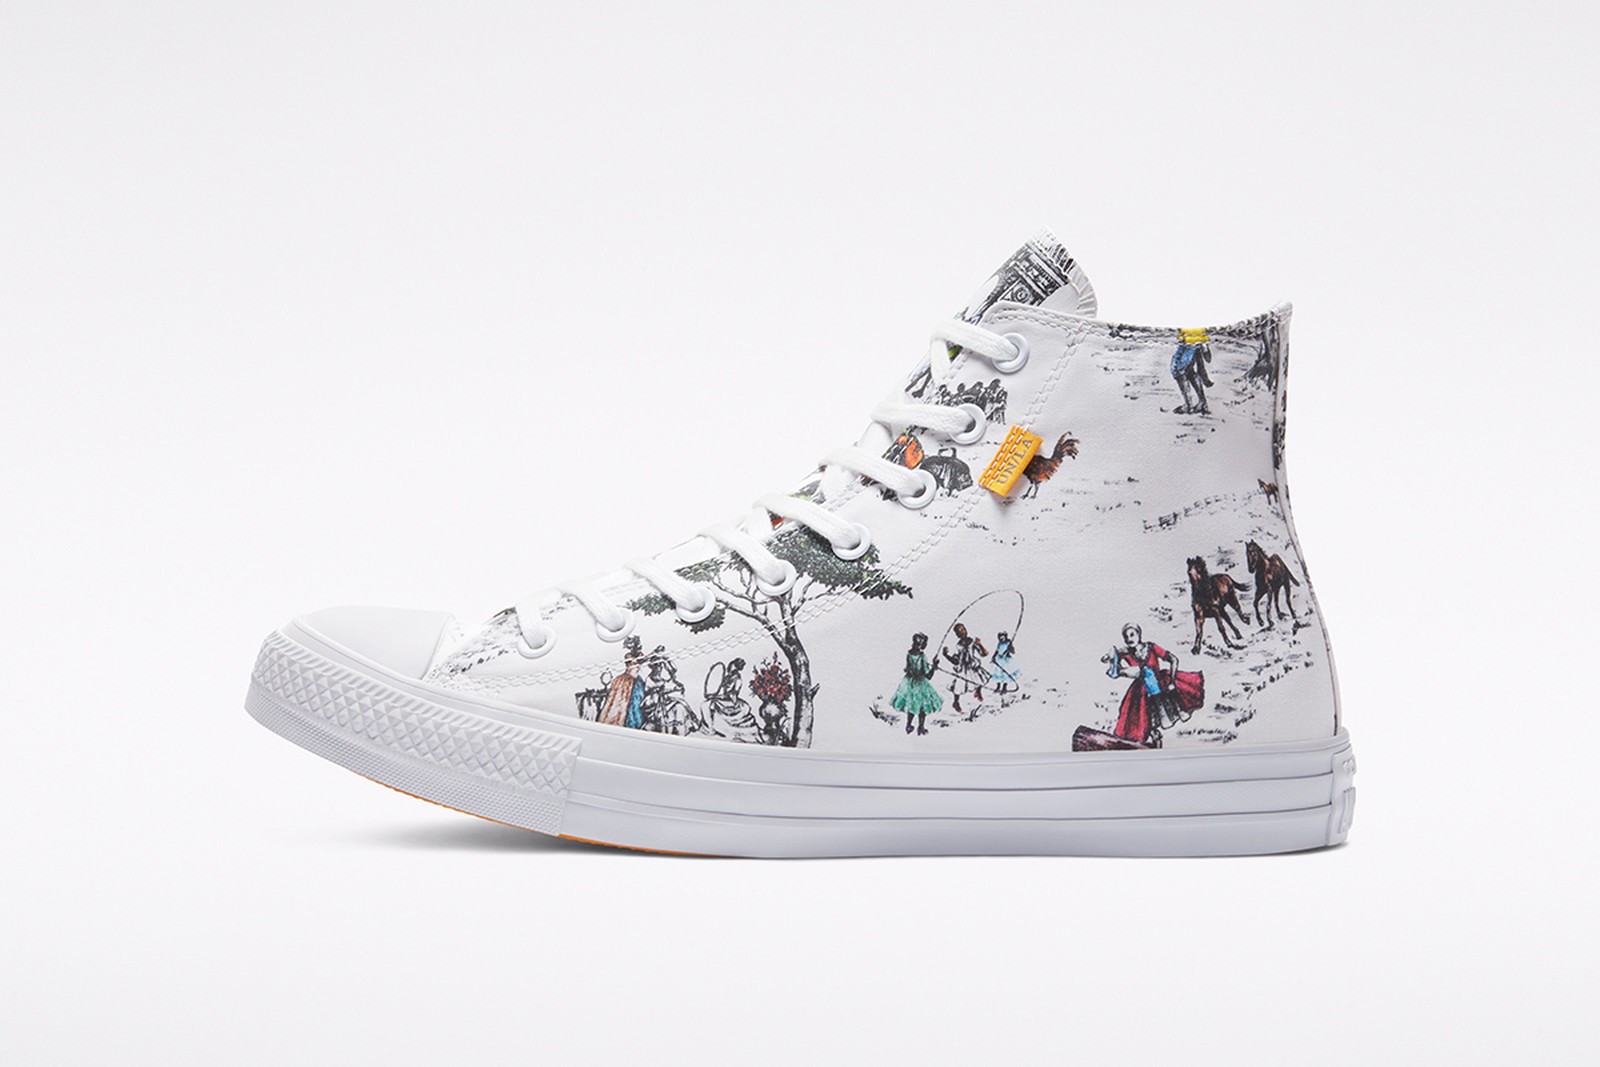 Converse Links With Union For Chuck Taylor Ft. Sheila Bridges